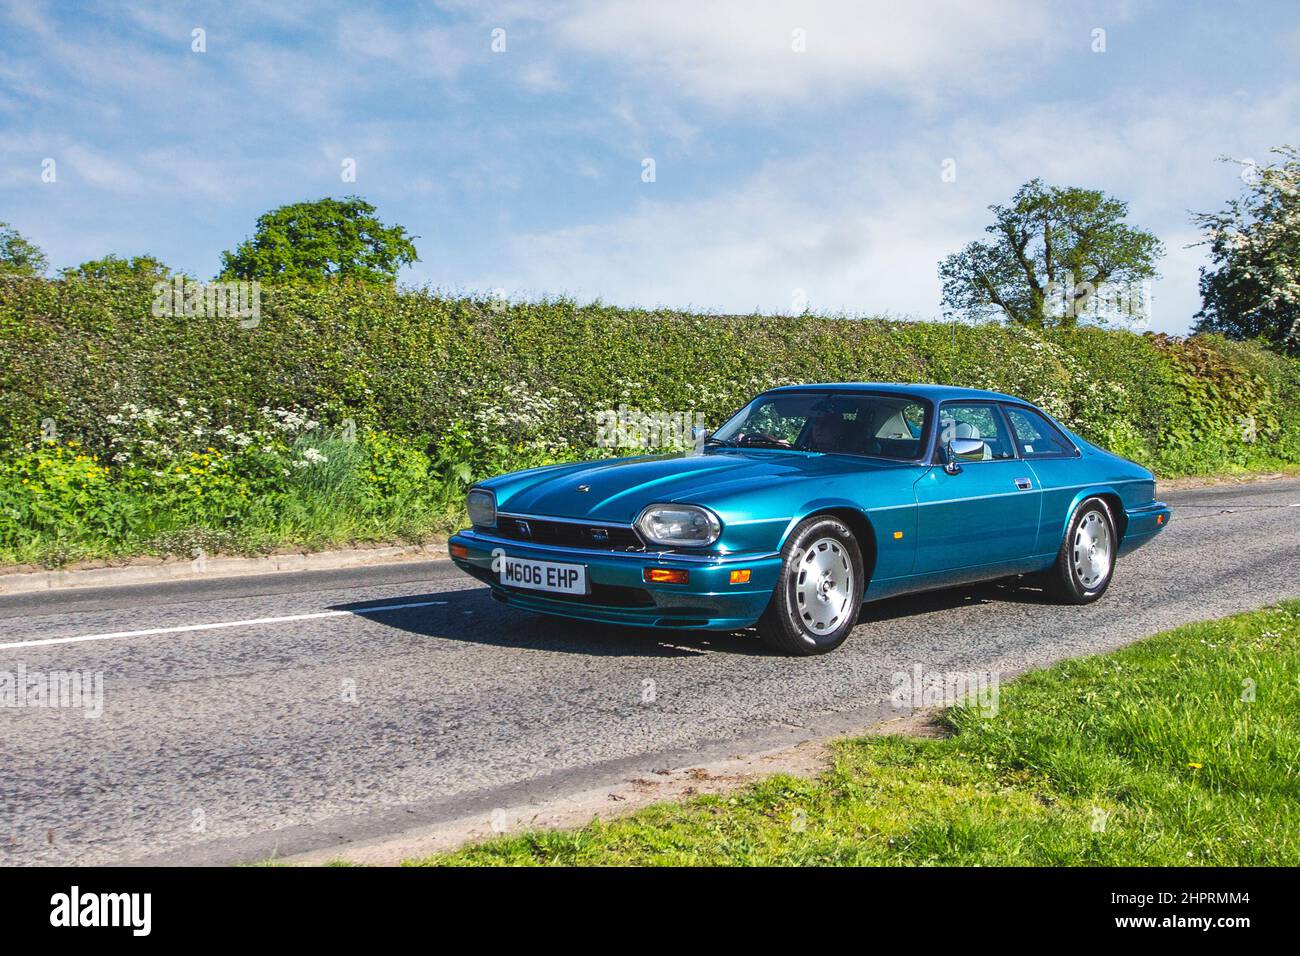 1995 90s nineties Jaguar XJS XJR SupChr 3980cc 4 speed automatic.  DOHC Inline 6-Cylinder Engine Multi-port Fuel injection 233bhb at 4,700rpm 4-Speed Automatic Transmission 4-Wheel Independent Suspension supercar en-route to Capesthorne Hall classic May car show, Cheshire, UK Stock Photo